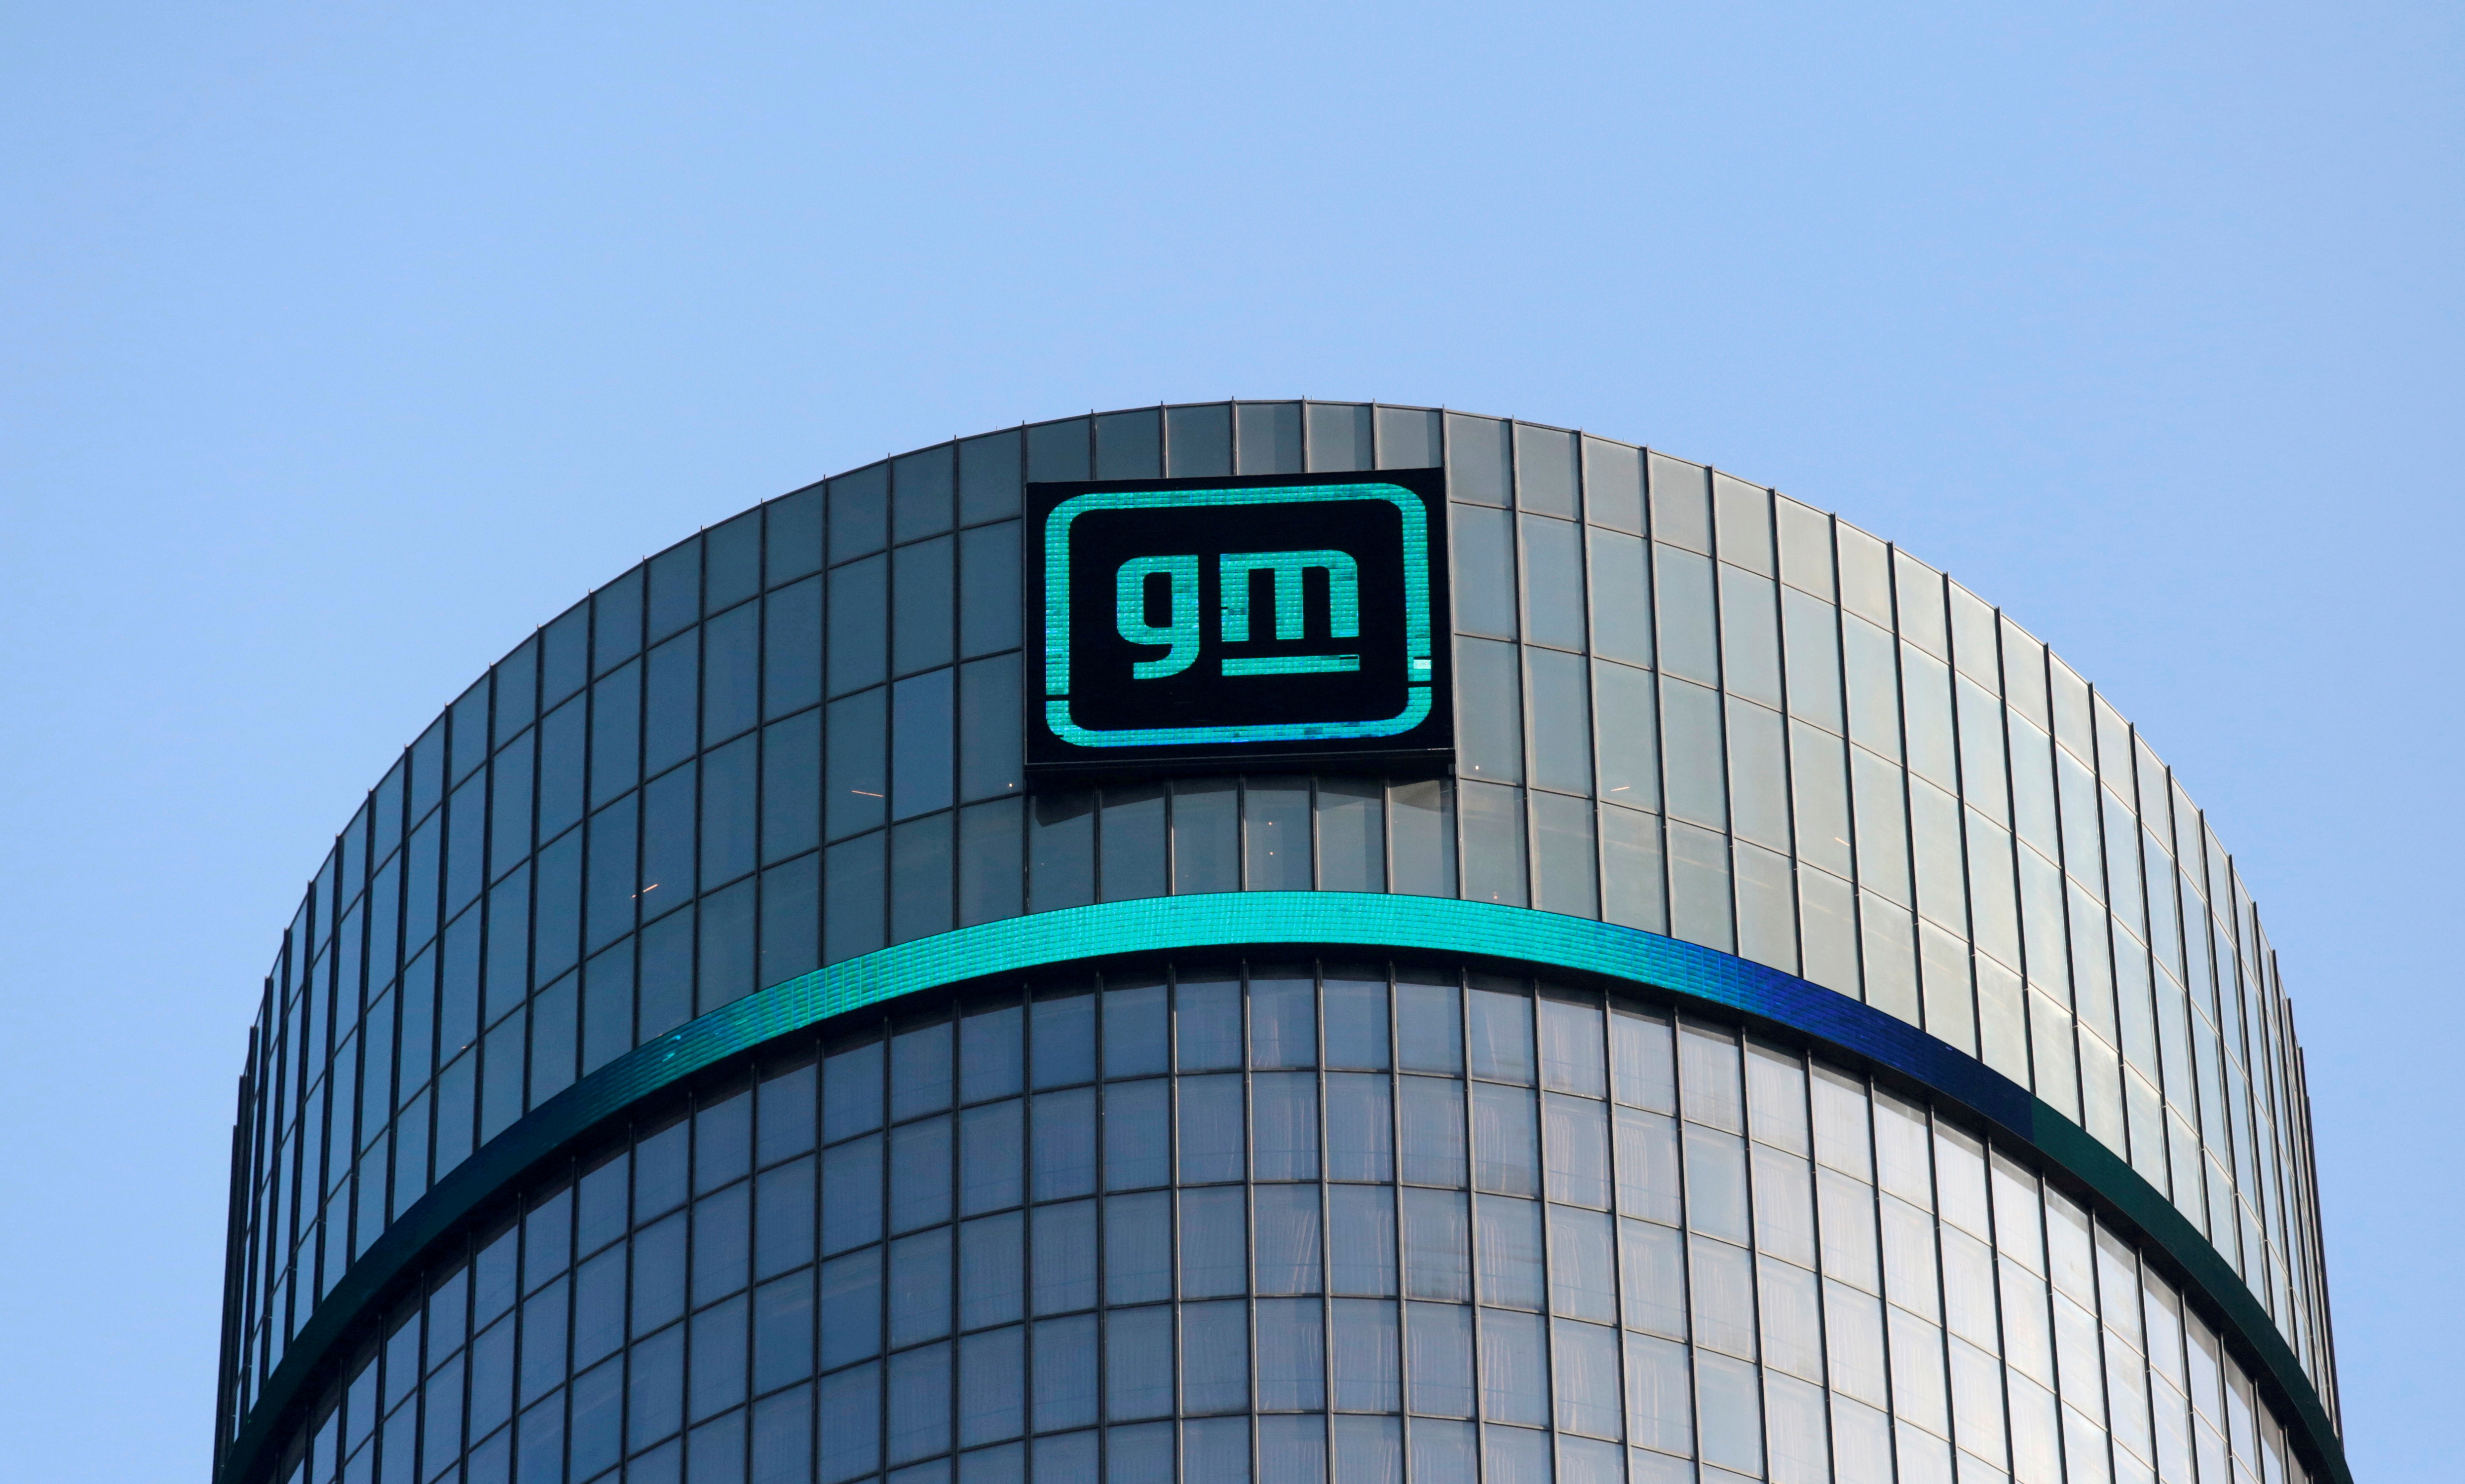 The new GM logo is seen on the facade of the General Motors headquarters in Detroit, Michigan, U.S., March 16, 2021. REUTERS/Rebecca Cook/File Photo